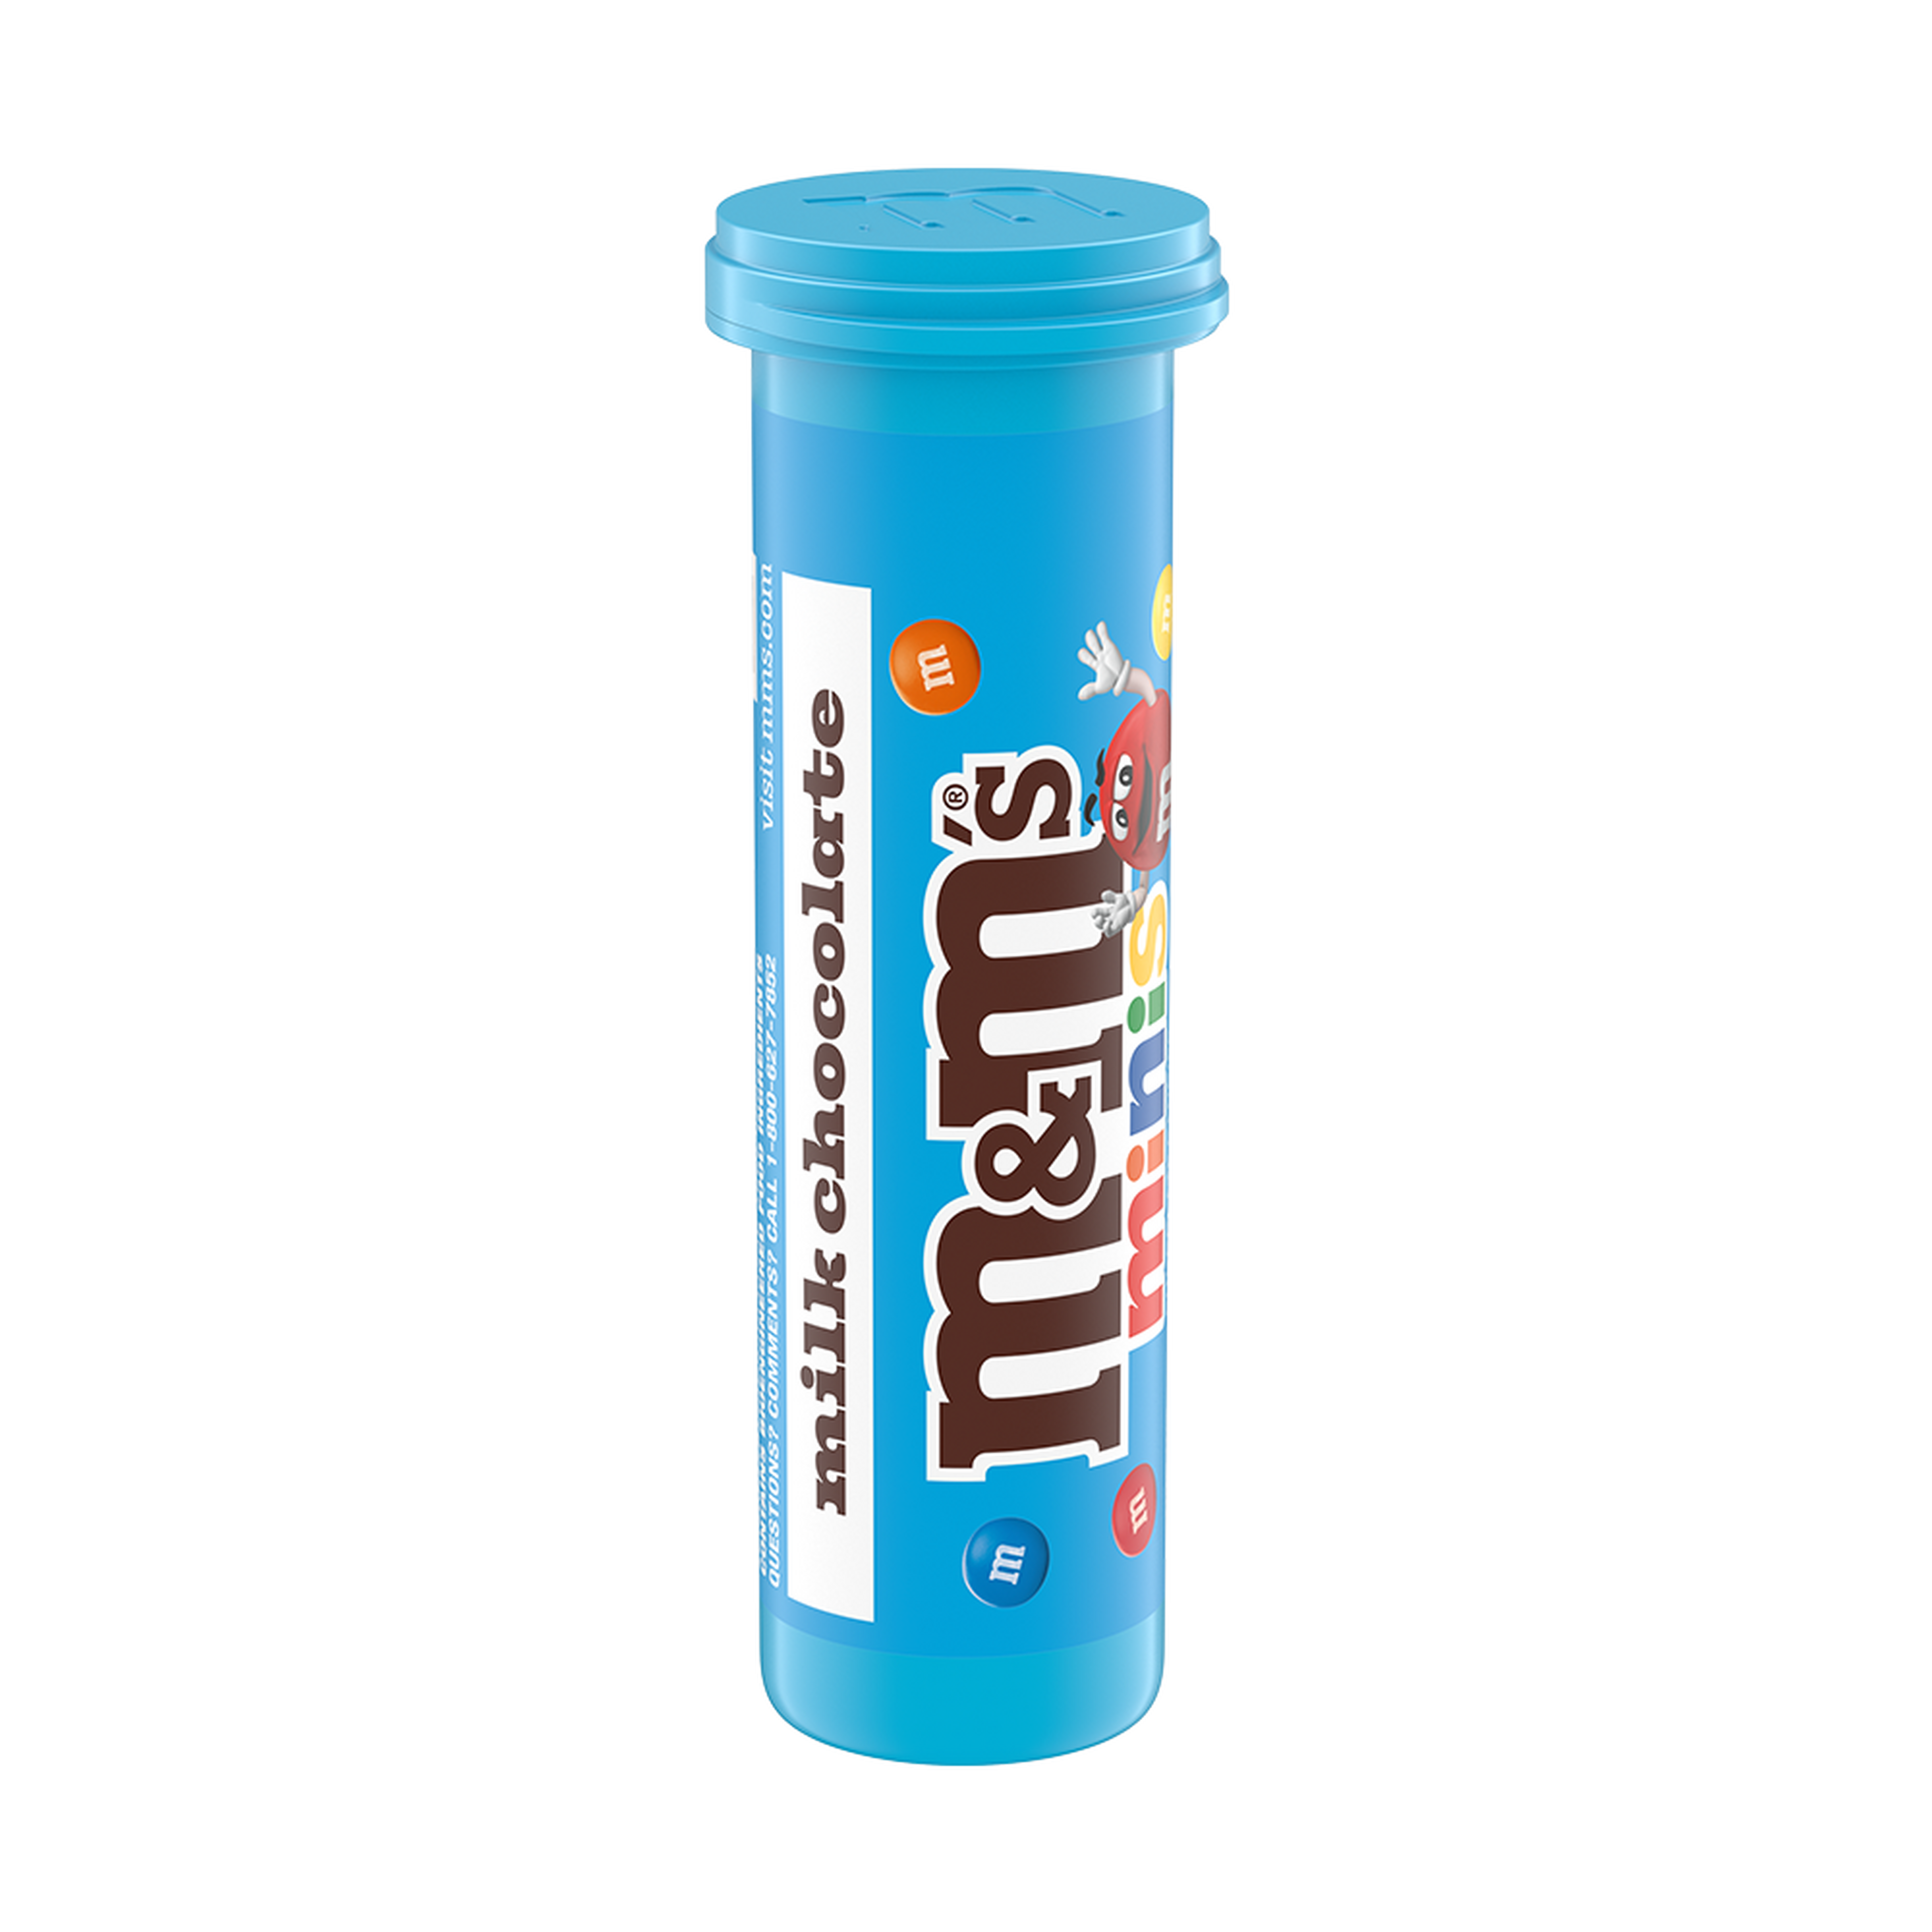 Milk Chocolate M&M'S Minis Candy Tubes, 24 ct box (package may vary) 1